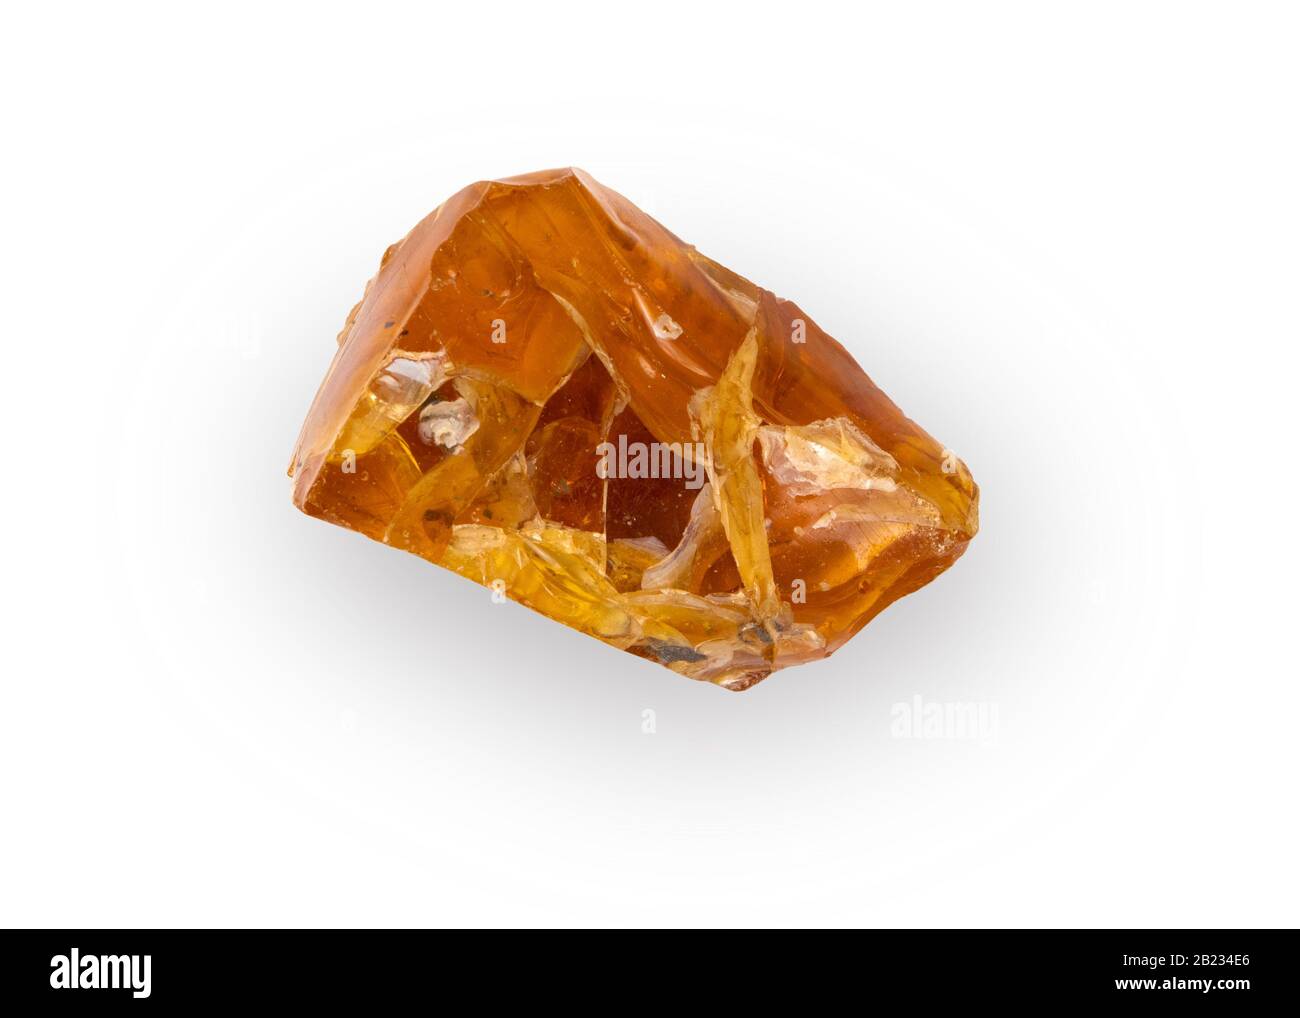 Piece of natural raw amber with white inclusions isolated on white background Stock Photo